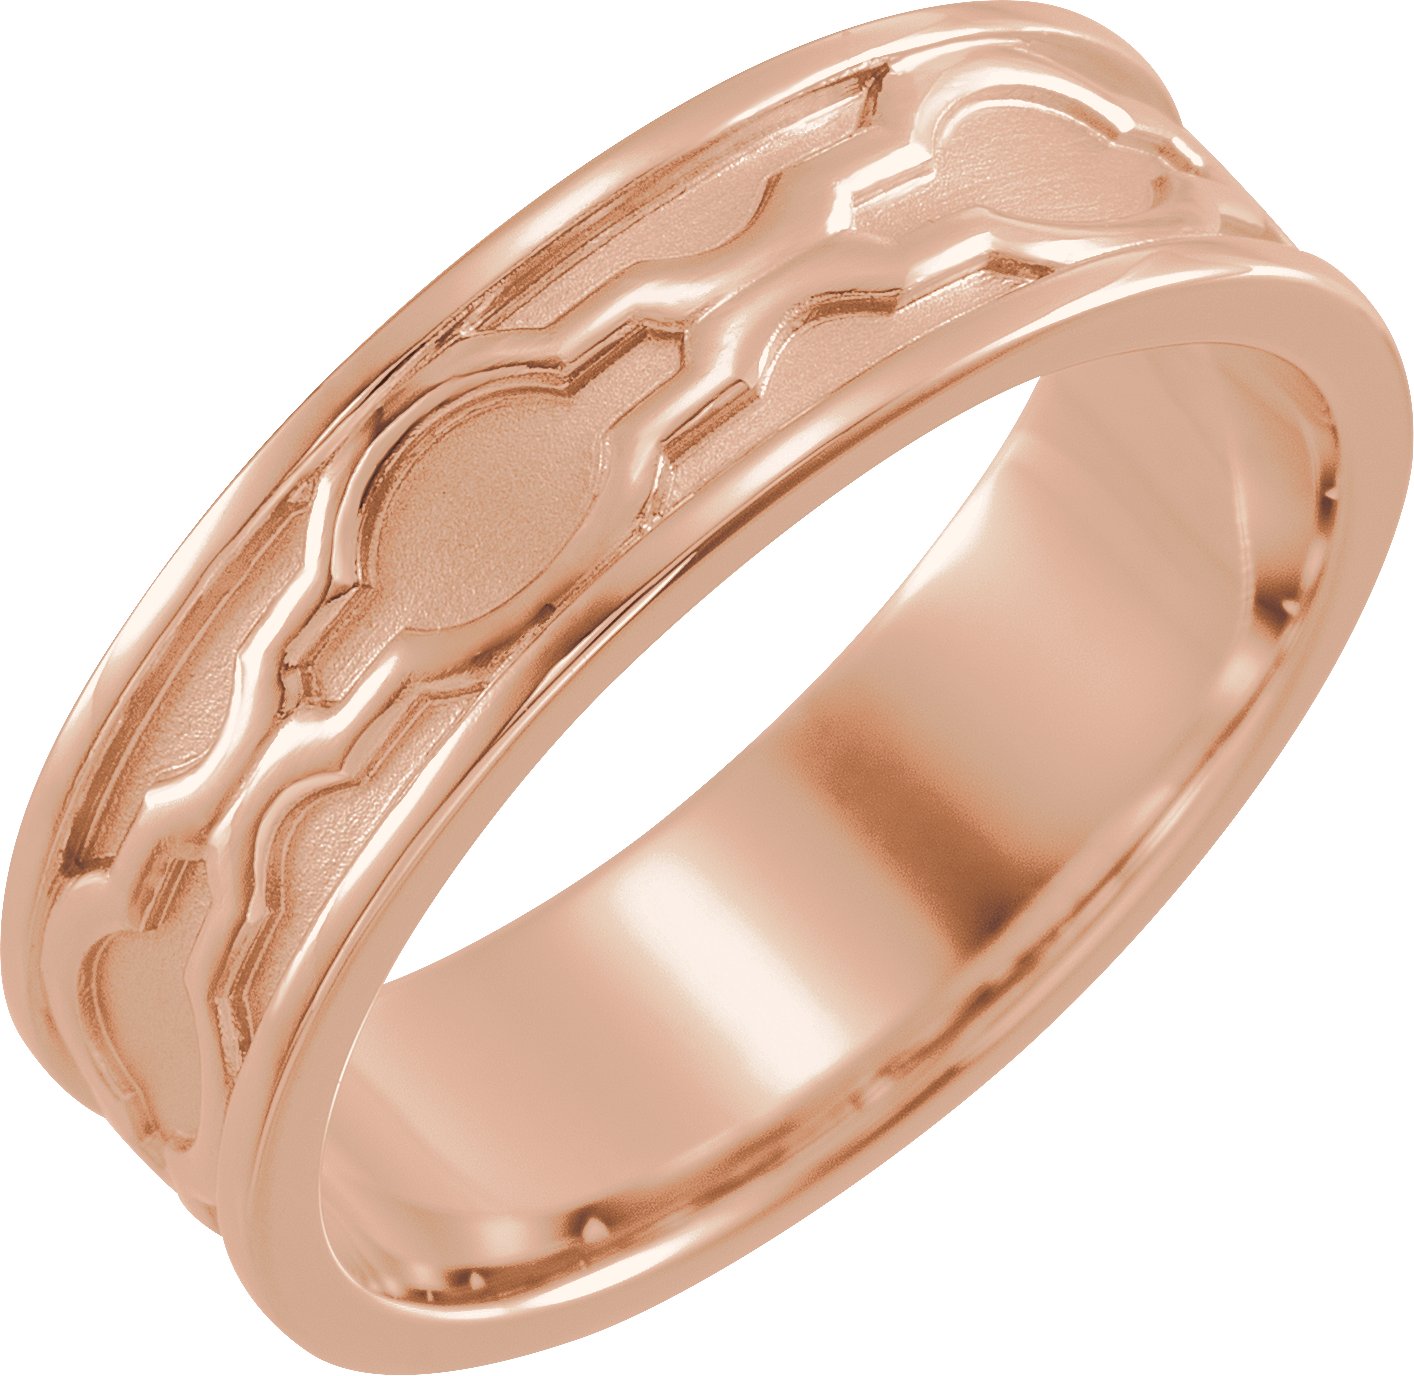 14K Rose 6 mm Patterned Band with Bead Blast Finish Size 5.5 Ref 16324057